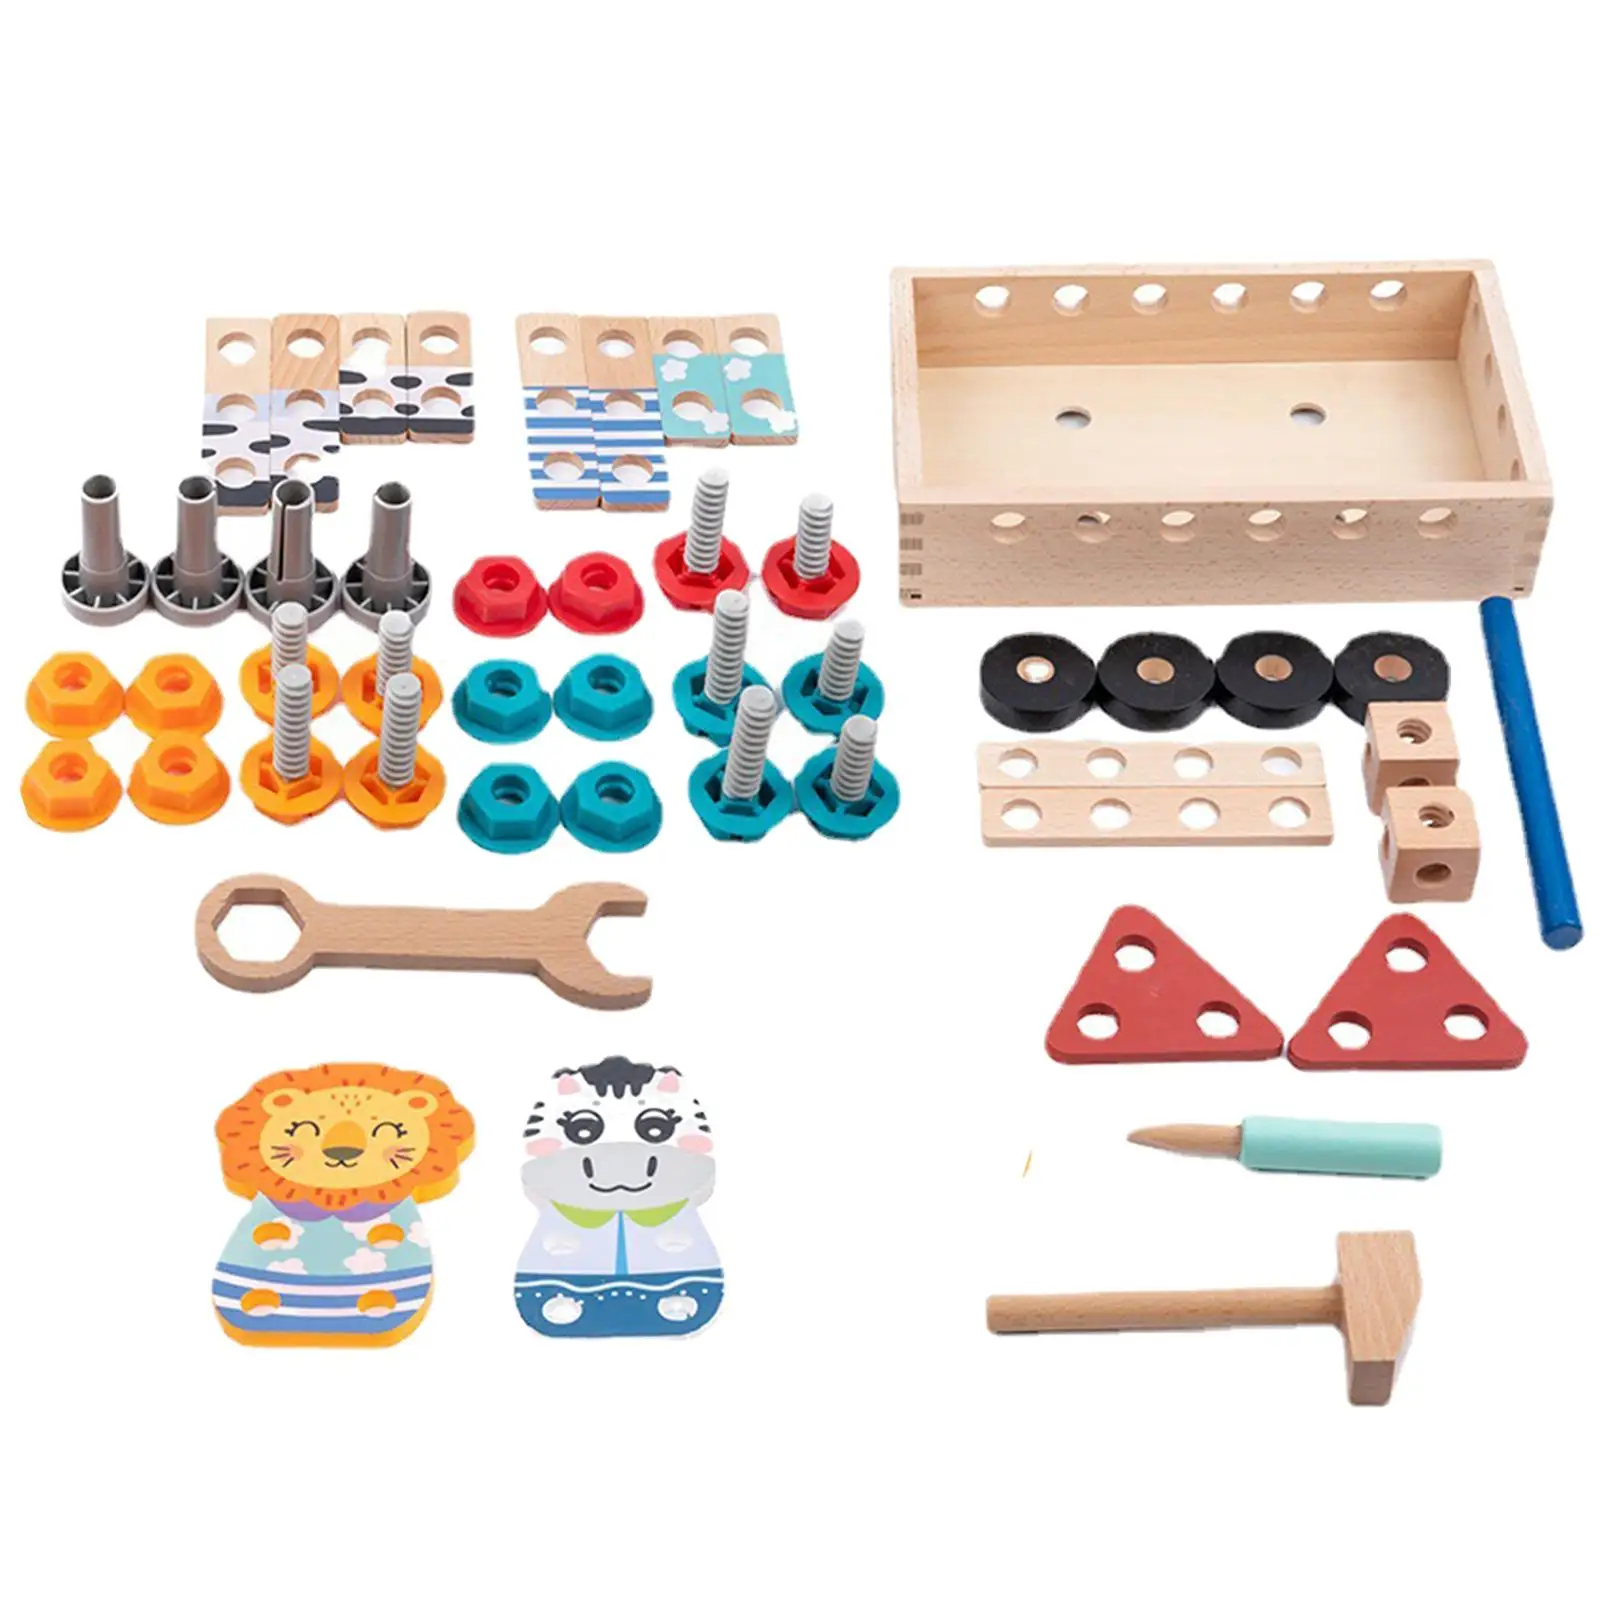 DIY Construction kids Toolbox Set for Activities Education Role Play